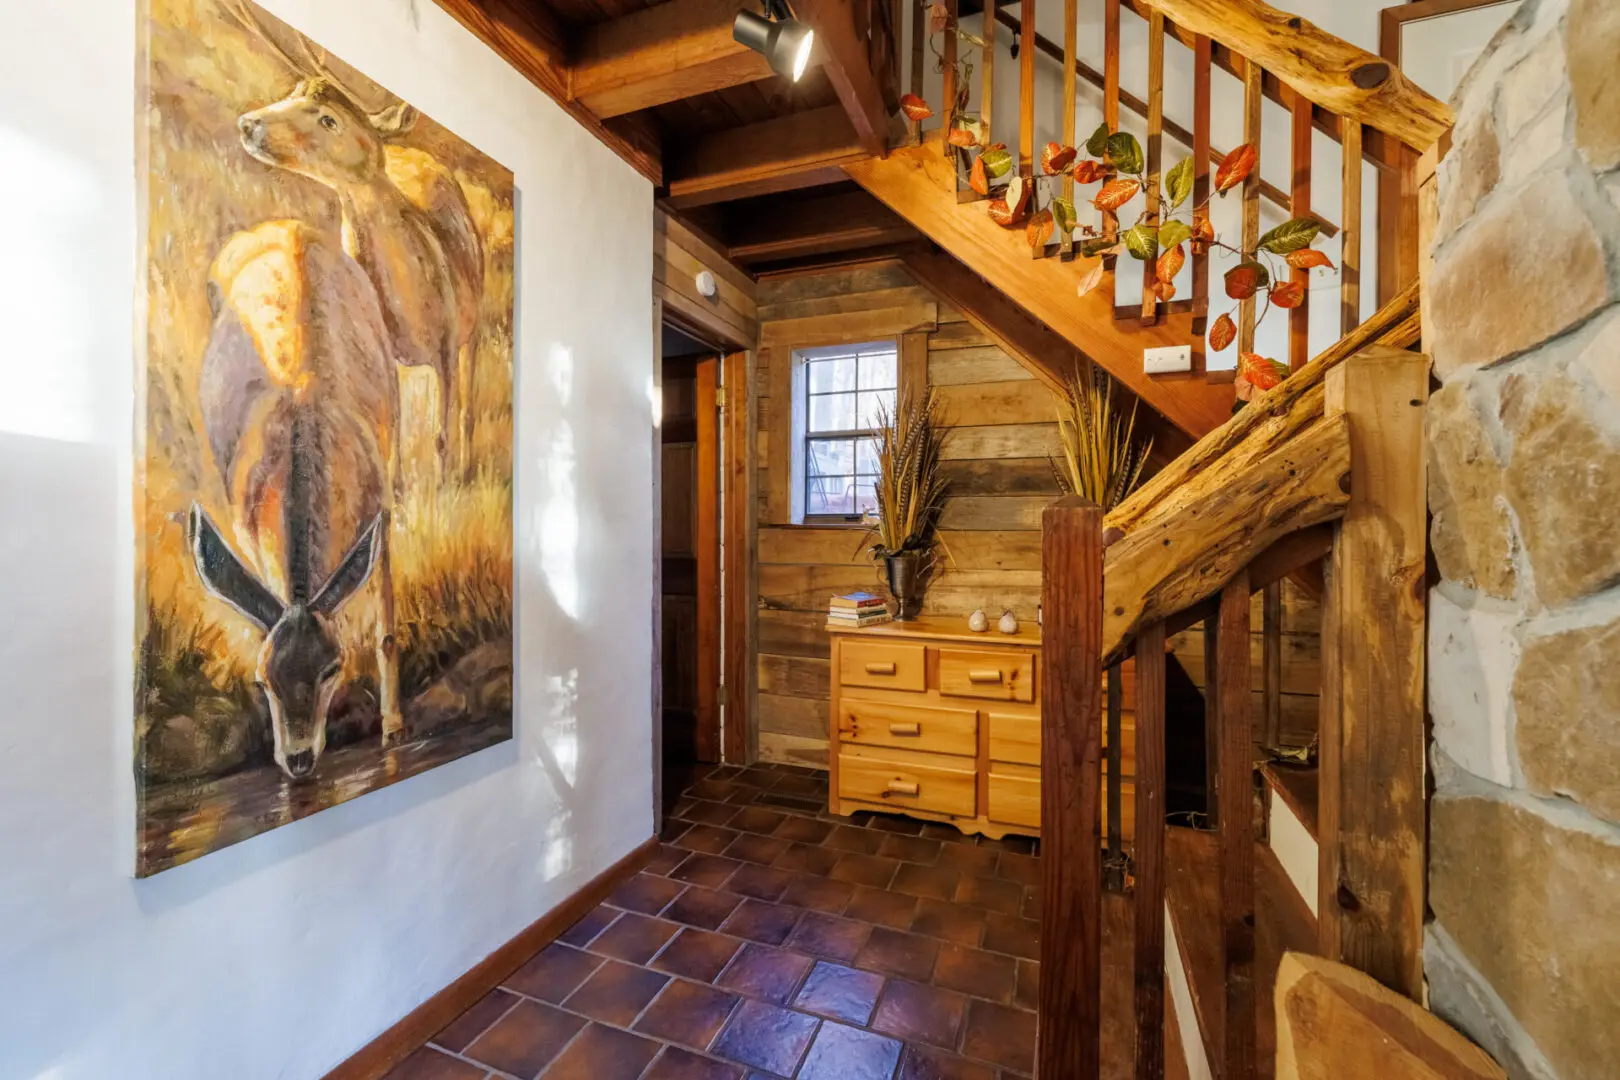 A vacation-themed wooden staircase with a painting on the wall.